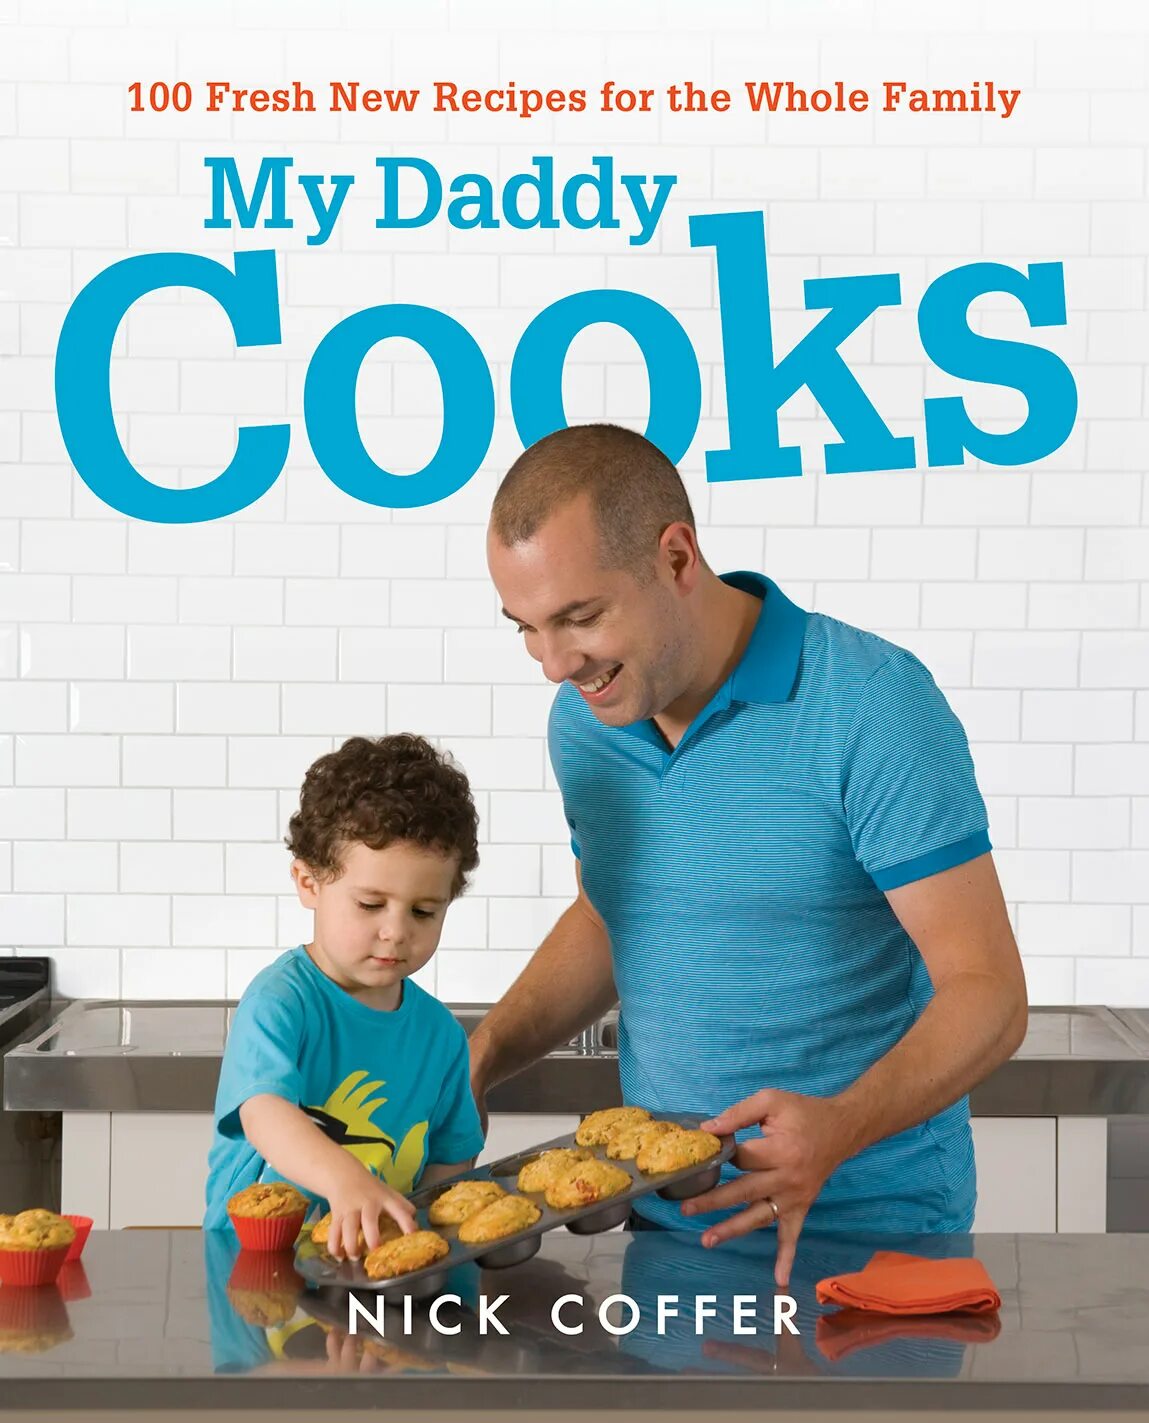 Dad a cook. Nick dad. My Daddy. Children's Cookery book. Your dad Cook.